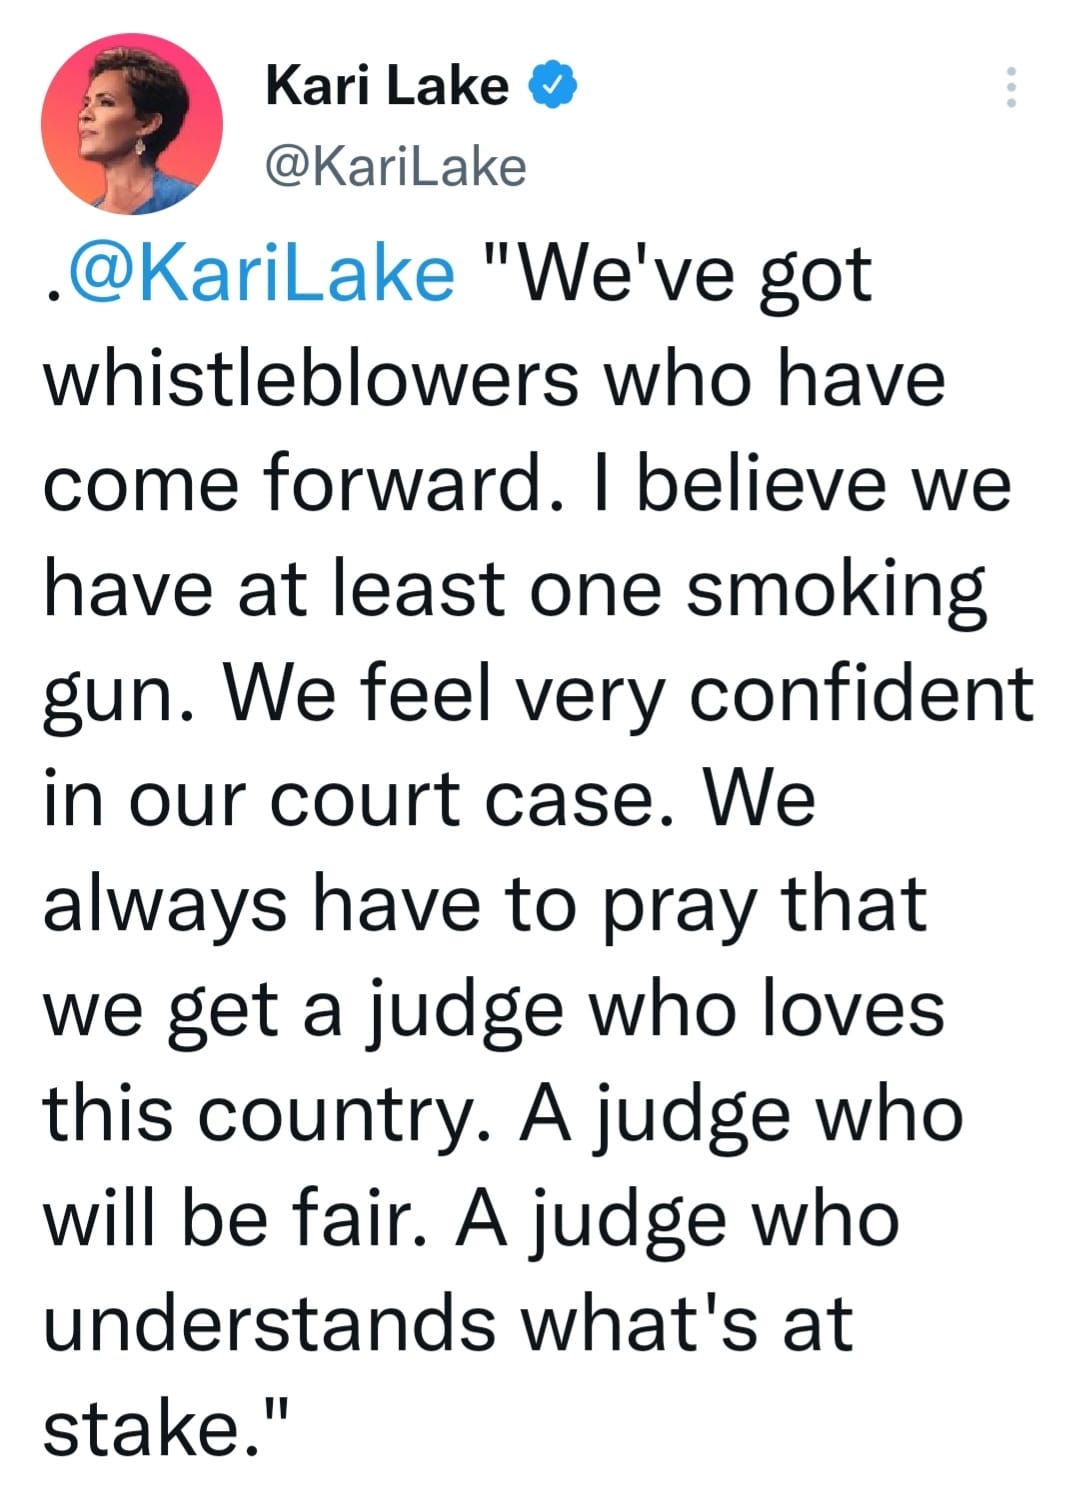 May be an image of 1 person and text that says 'Kari Lake @KariLake @KariLake "We've got whistleblowers who have come forward. I believe we have at least one smoking gun. We feel very confident in our court case. We always have to pray that we get a judge who loves this country. A judge who will be fair. A judge who understands what's at stake."'